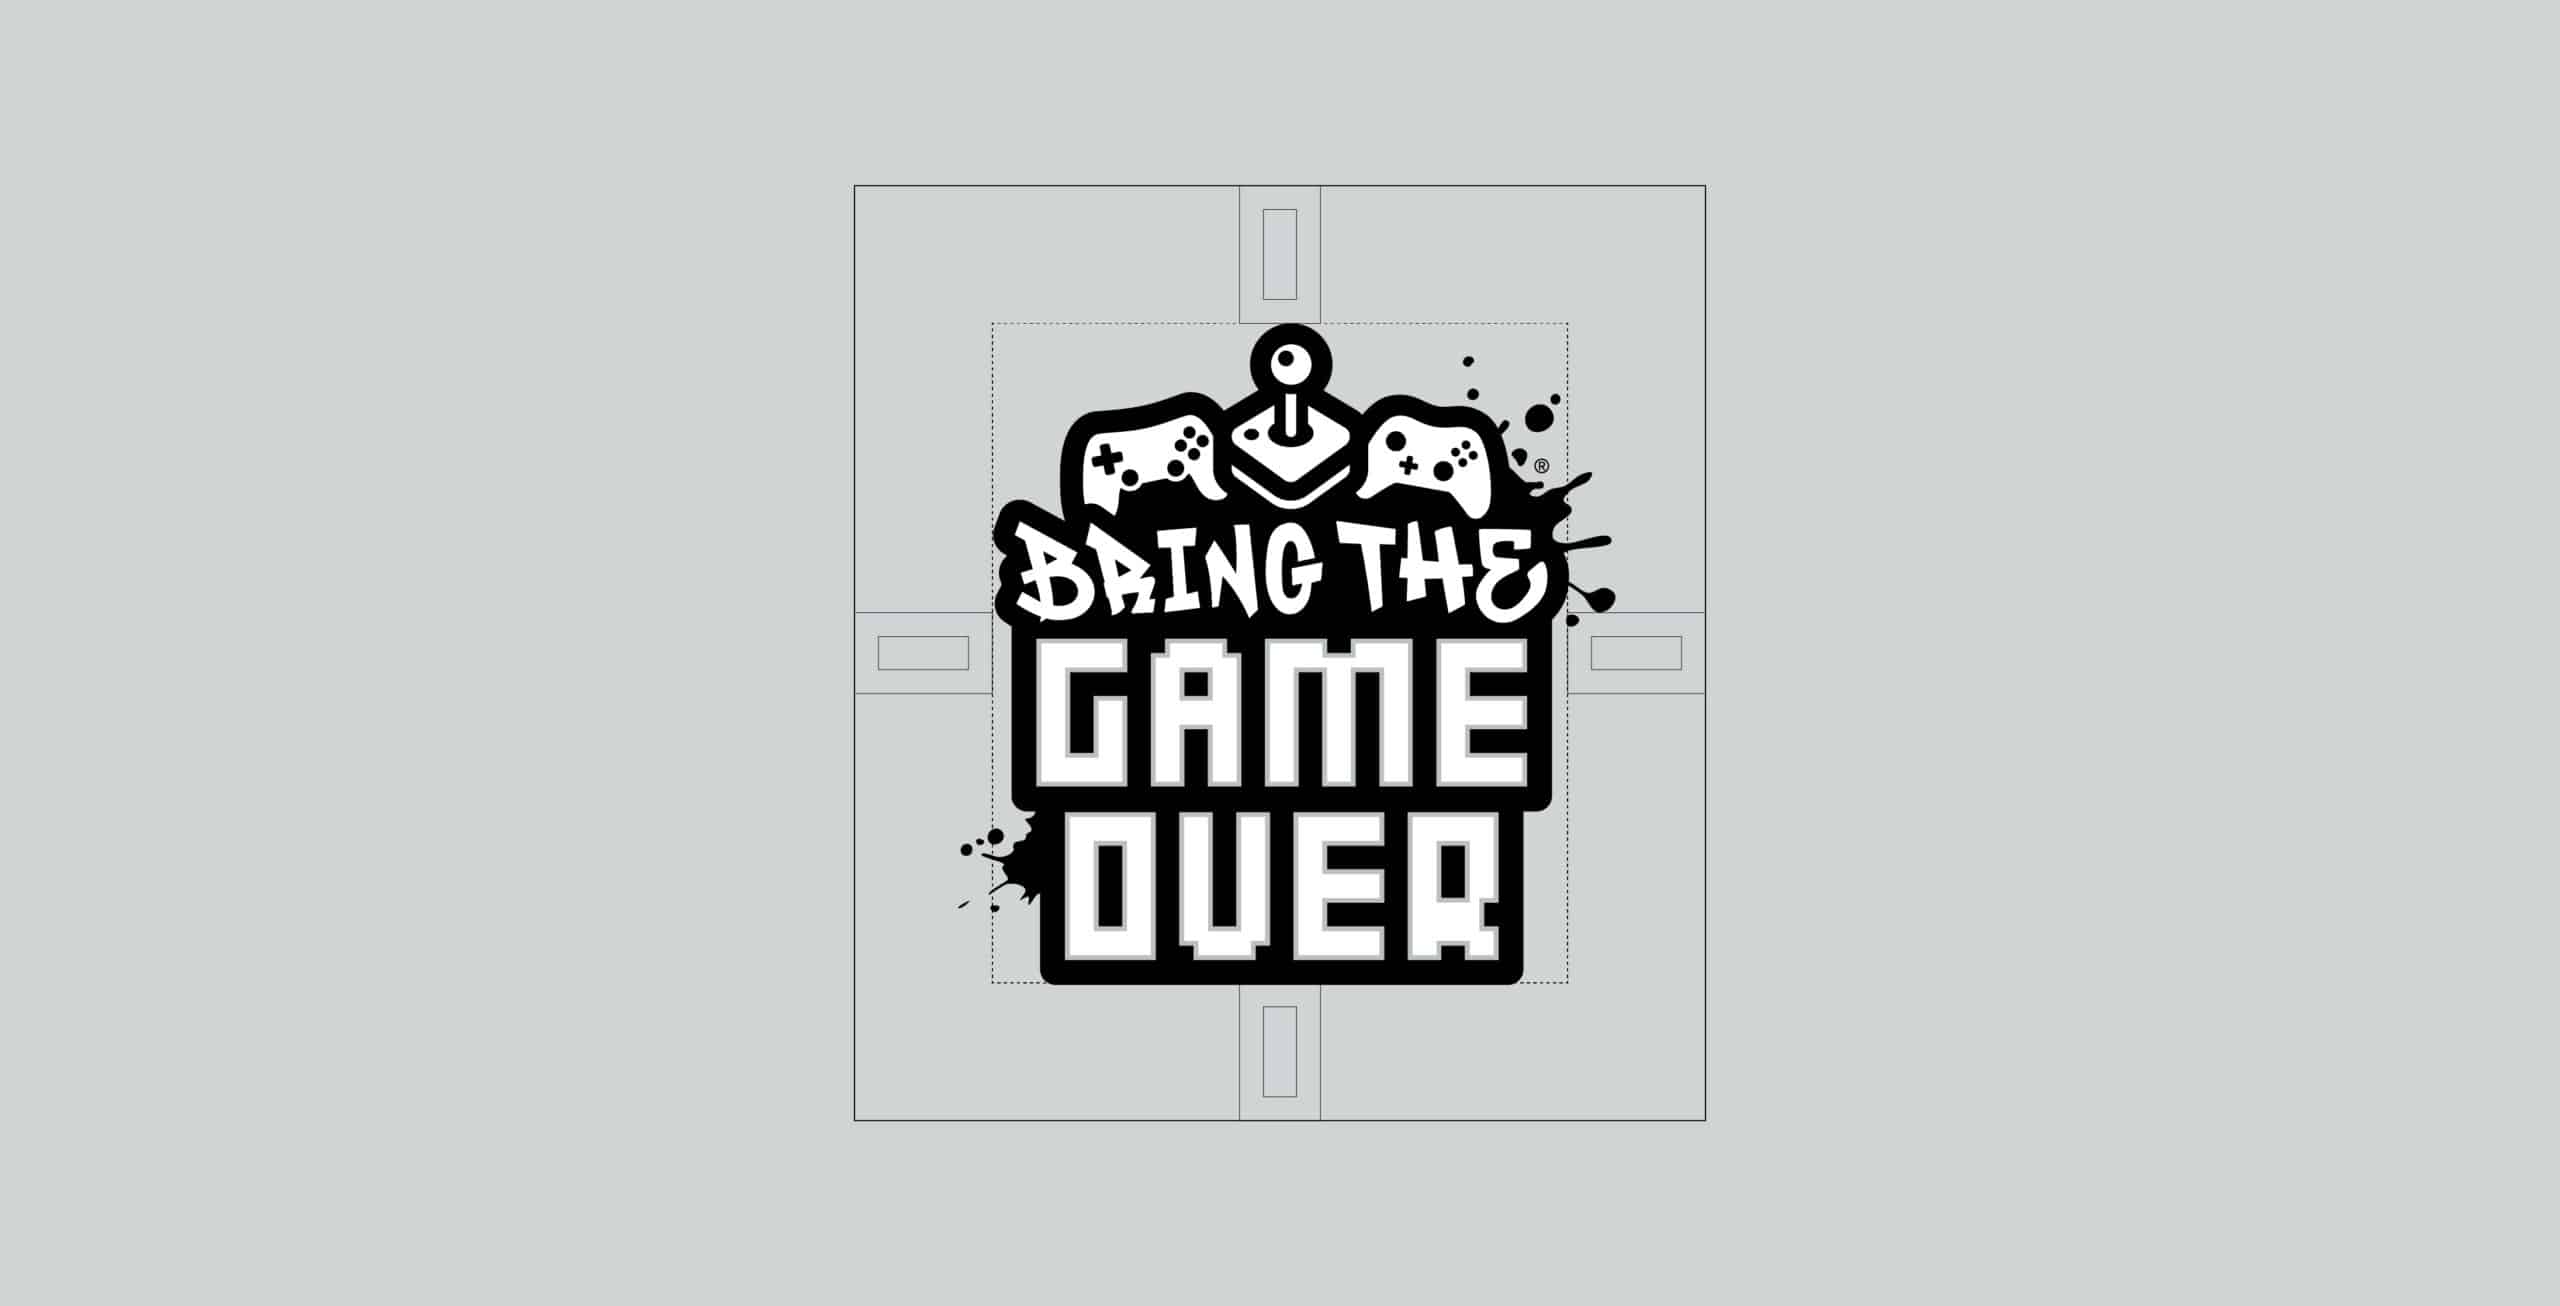 Bring the game over logo usage